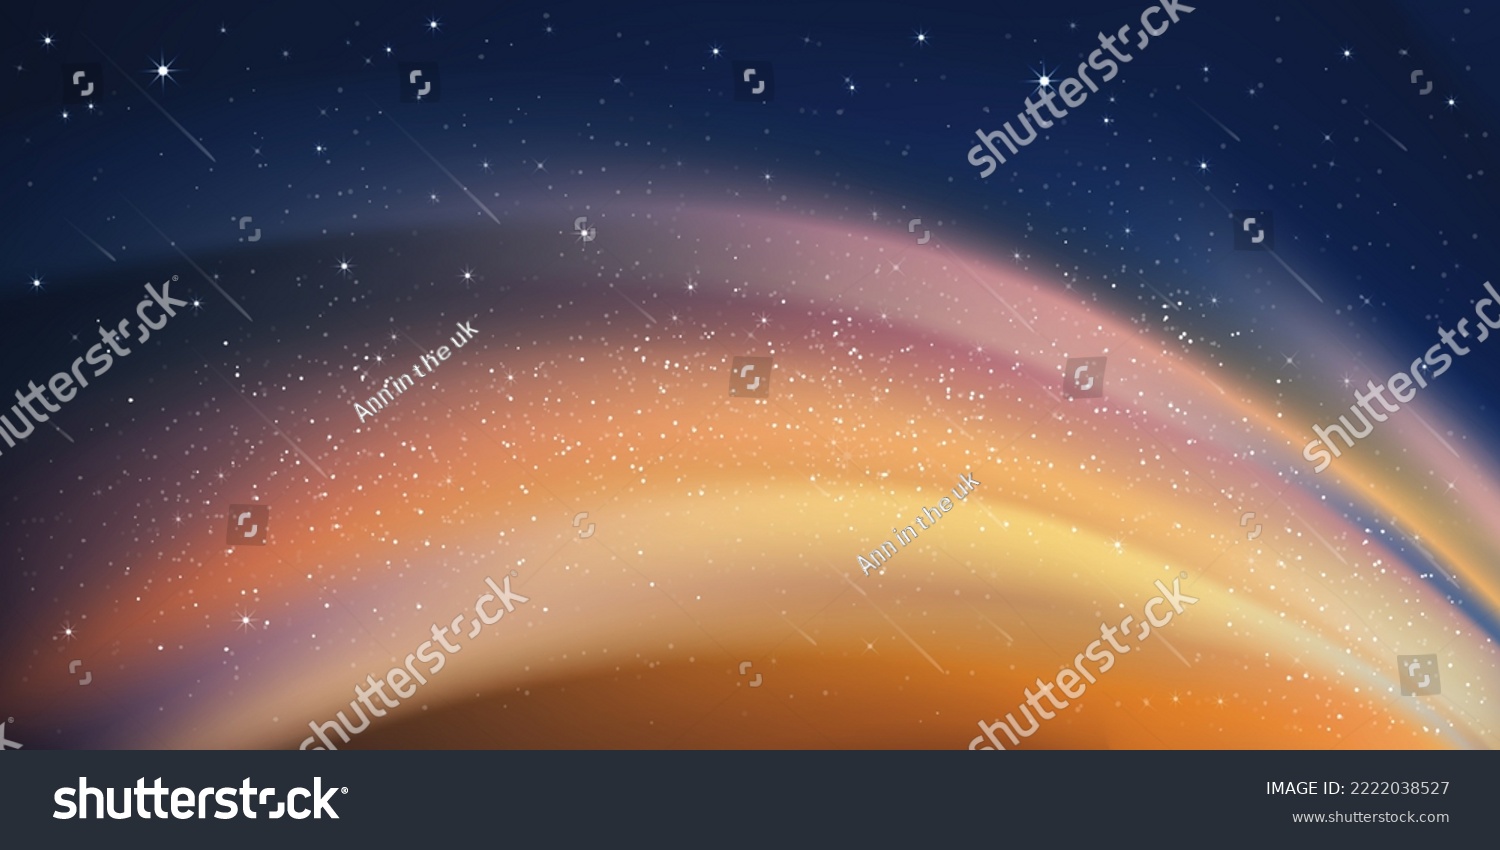 Milky Way and Orange light,Stars Shining and Comet falling,Night colourful landscape with Starry sky,Beautiful Universe with Space background of galaxy.Vector banner Star field in night sky for travel #2222038527